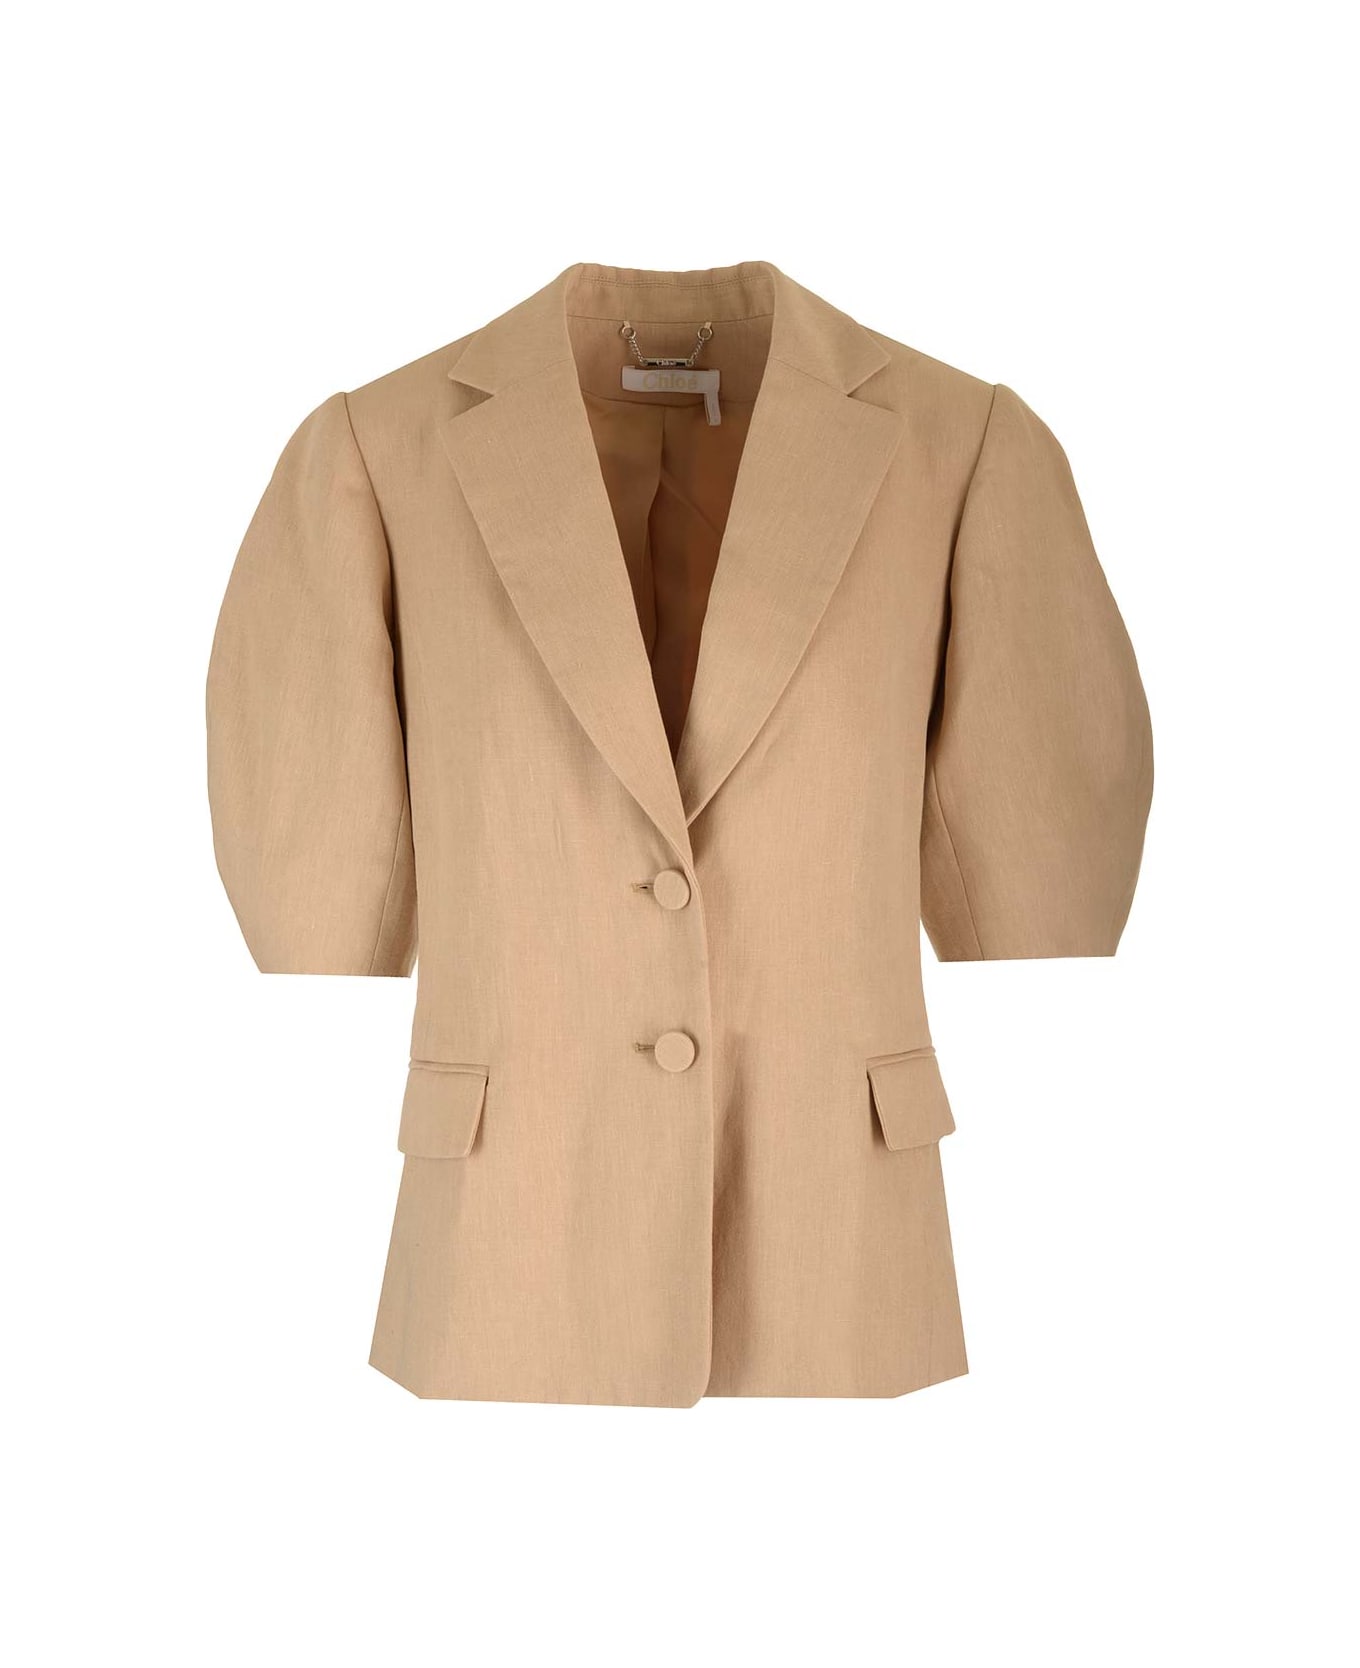 Chloé Single-breasted Jacket With Balloon Sleeves - Beige